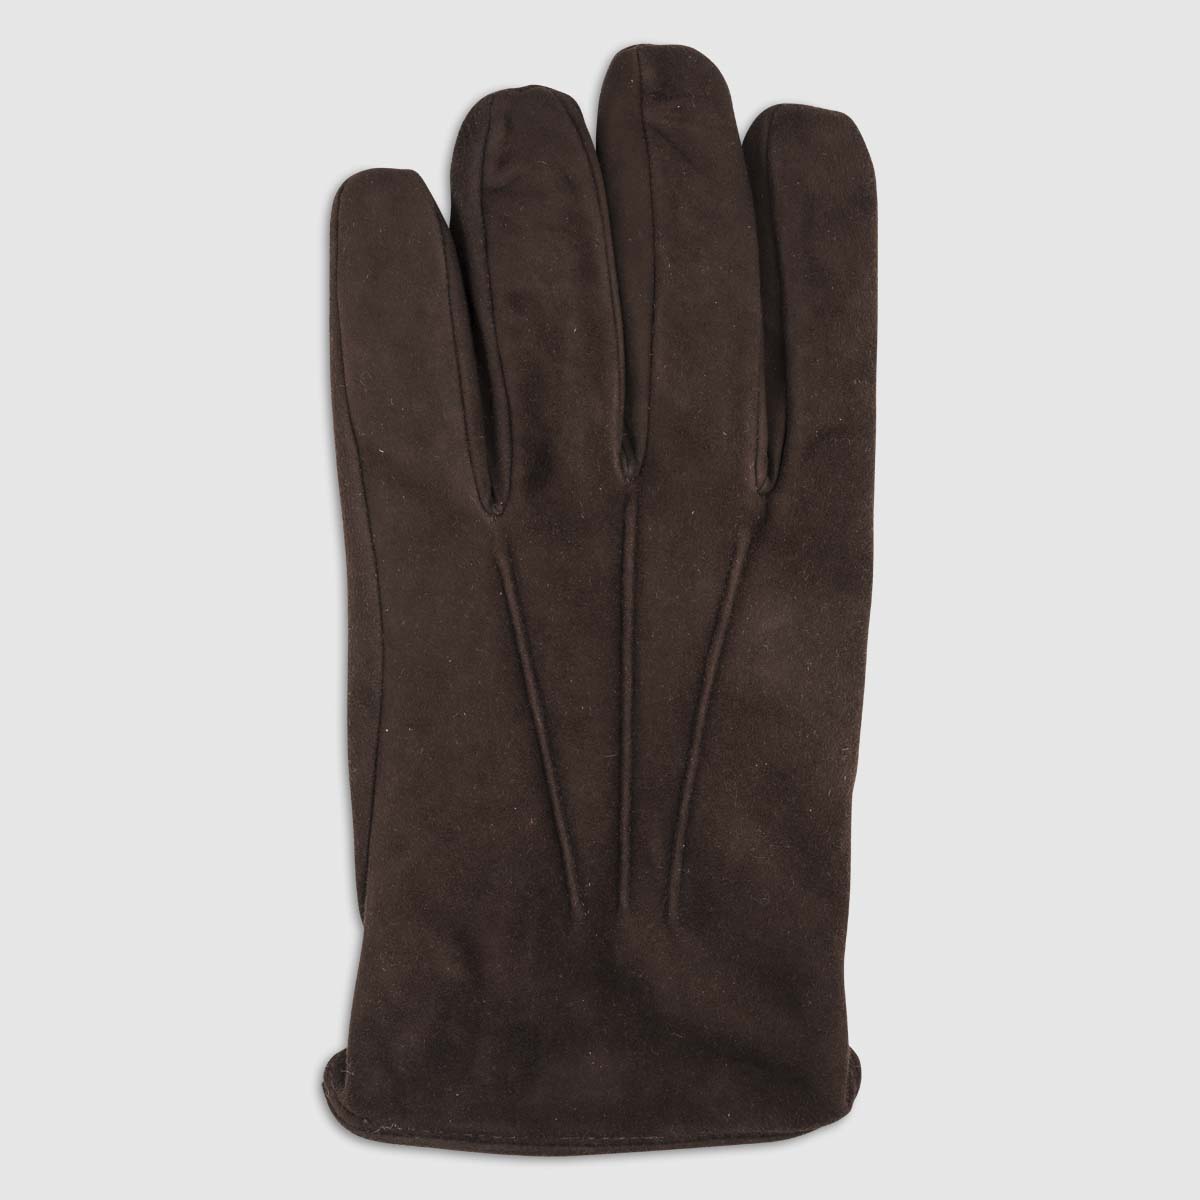 Suede Glove with Cashmere Lining in Brown – 8